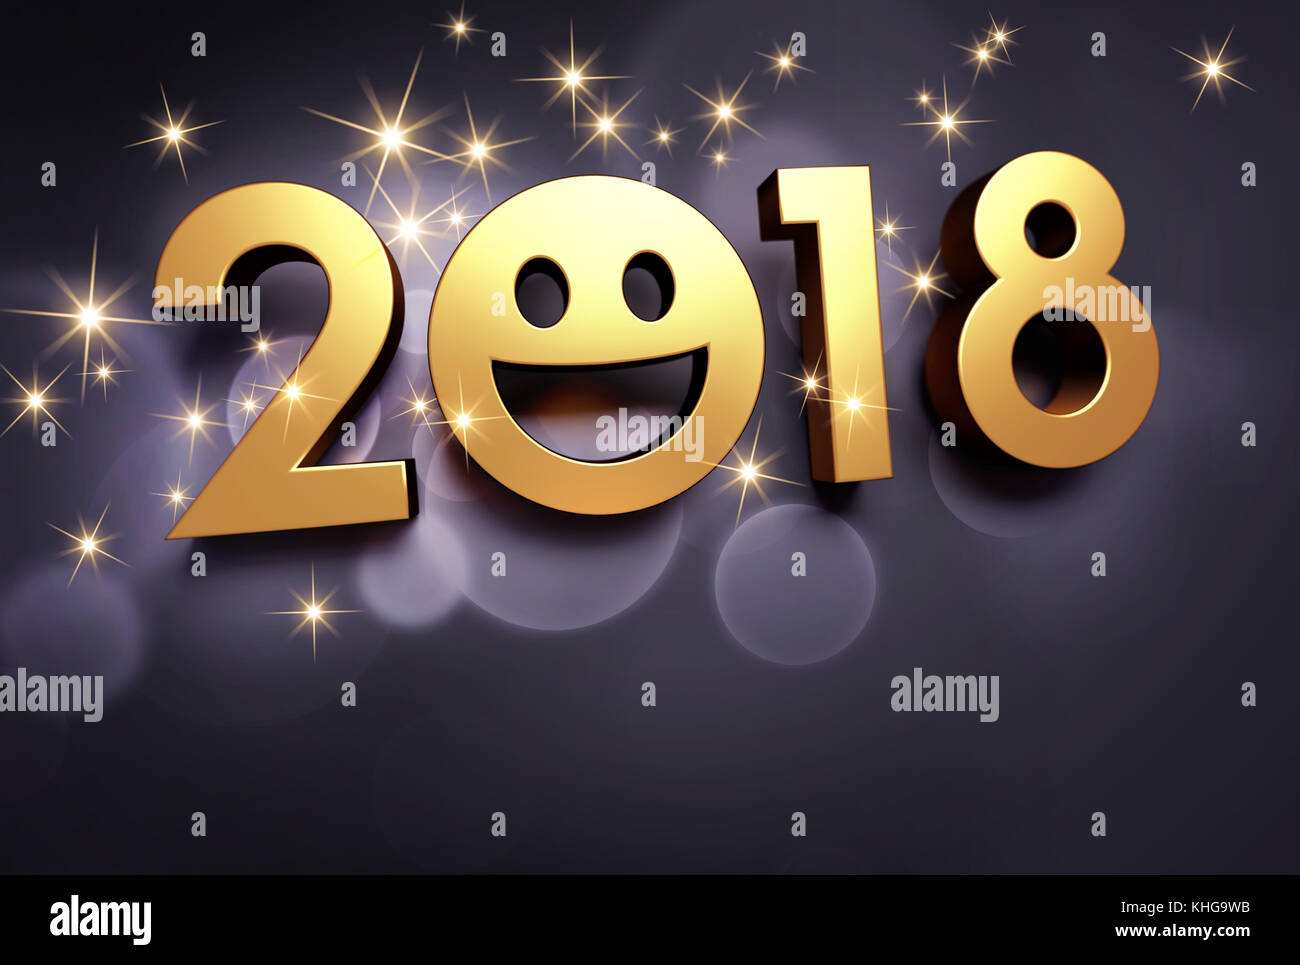 Joyful New year date 2018 and smiling face on a glittering black background - 3D illustration Stock Photo